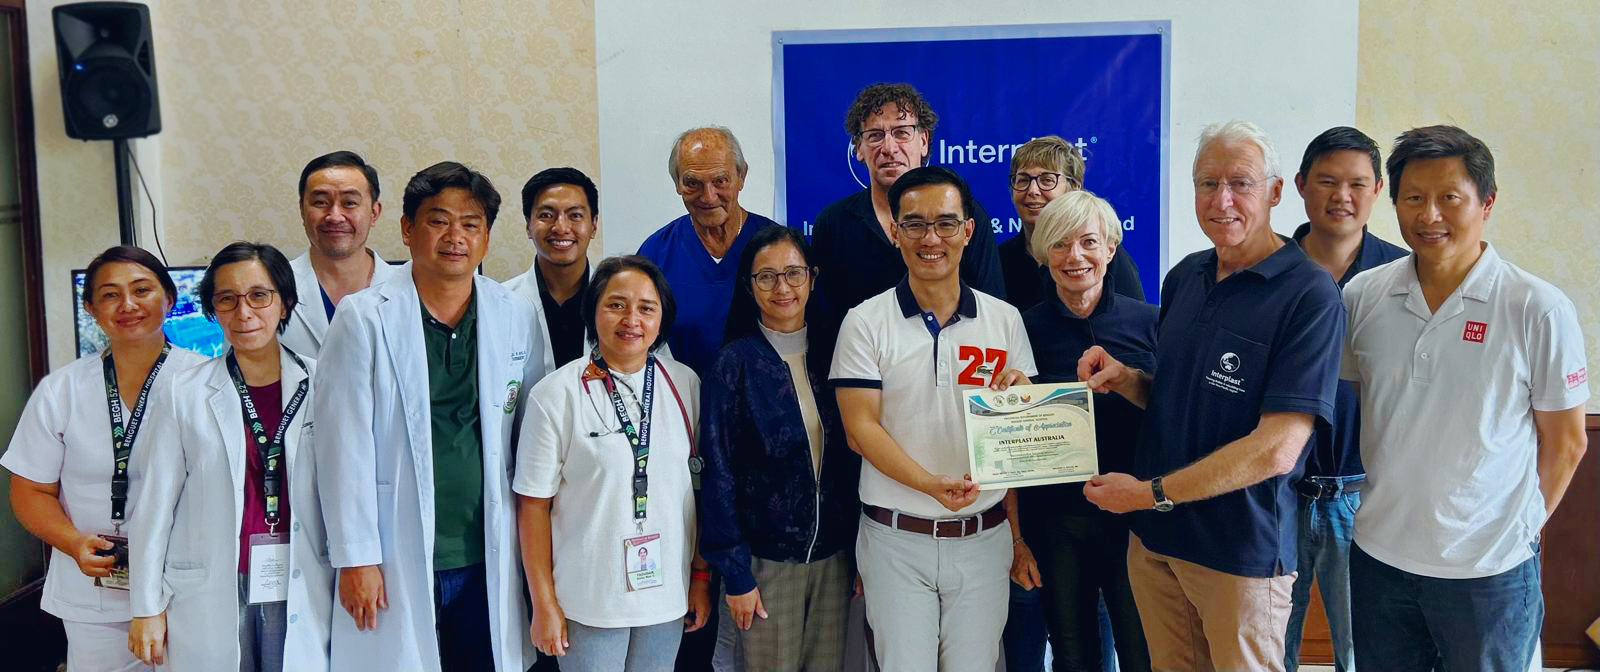 A group of people stand in front of a banner with Interplast’s logo and smile for the camera. Two hold a certificate.